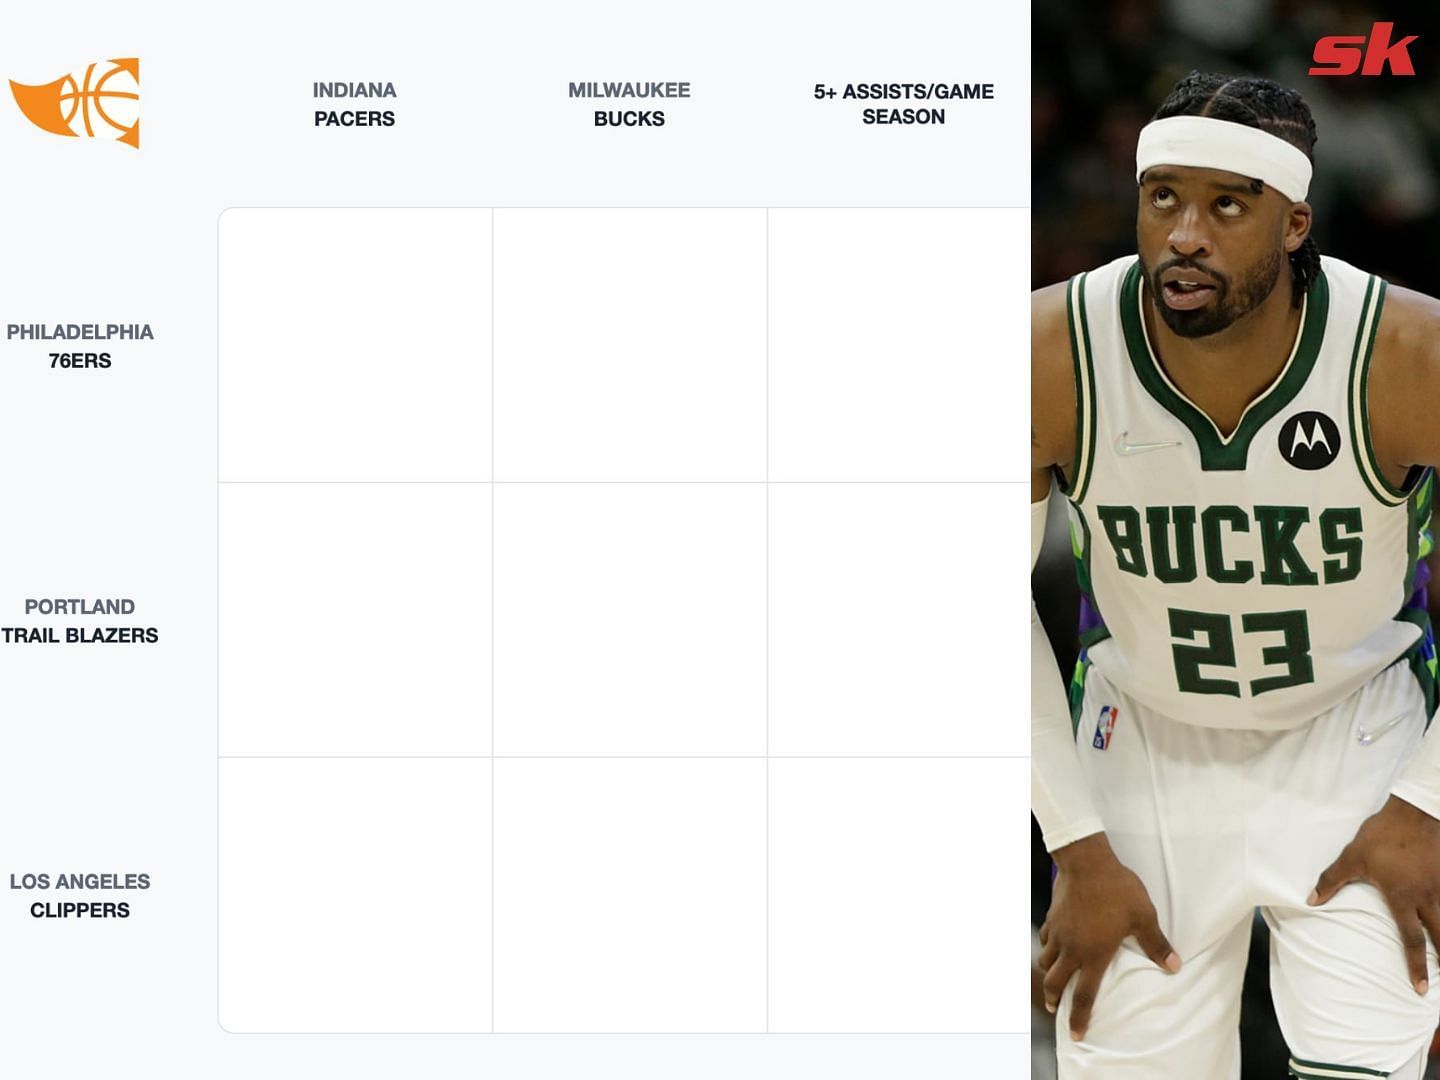 NBA Immaculate Grid July 28th: Which Bucks stars played for the Blazers and the Clippers?